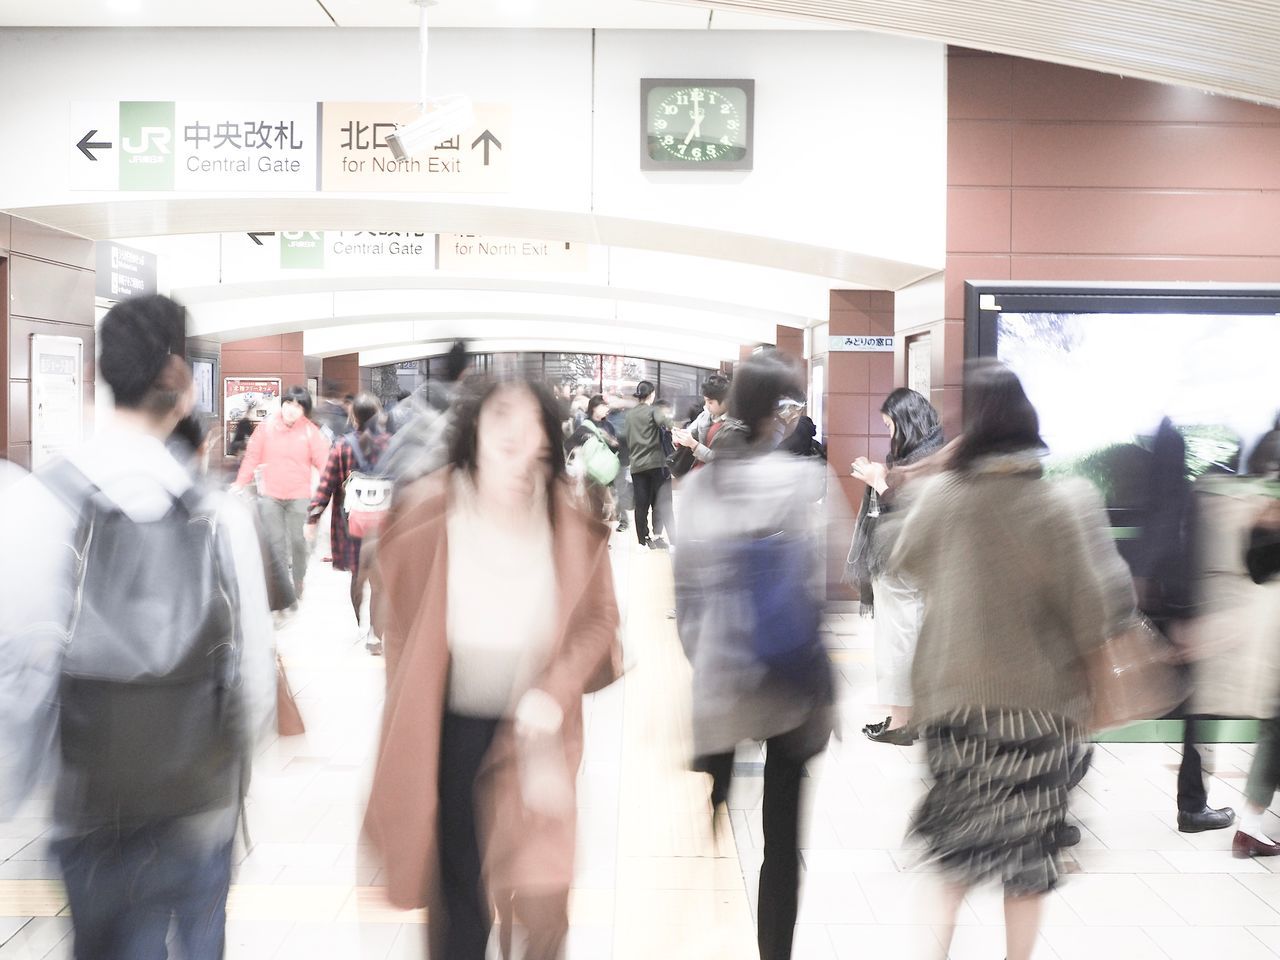 blurred motion, large group of people, motion, walking, real people, women, crowd, text, lifestyles, speed, men, public transportation, railroad station, transportation, casual clothing, indoors, commuter, rush hour, day, architecture, clock, adult, people